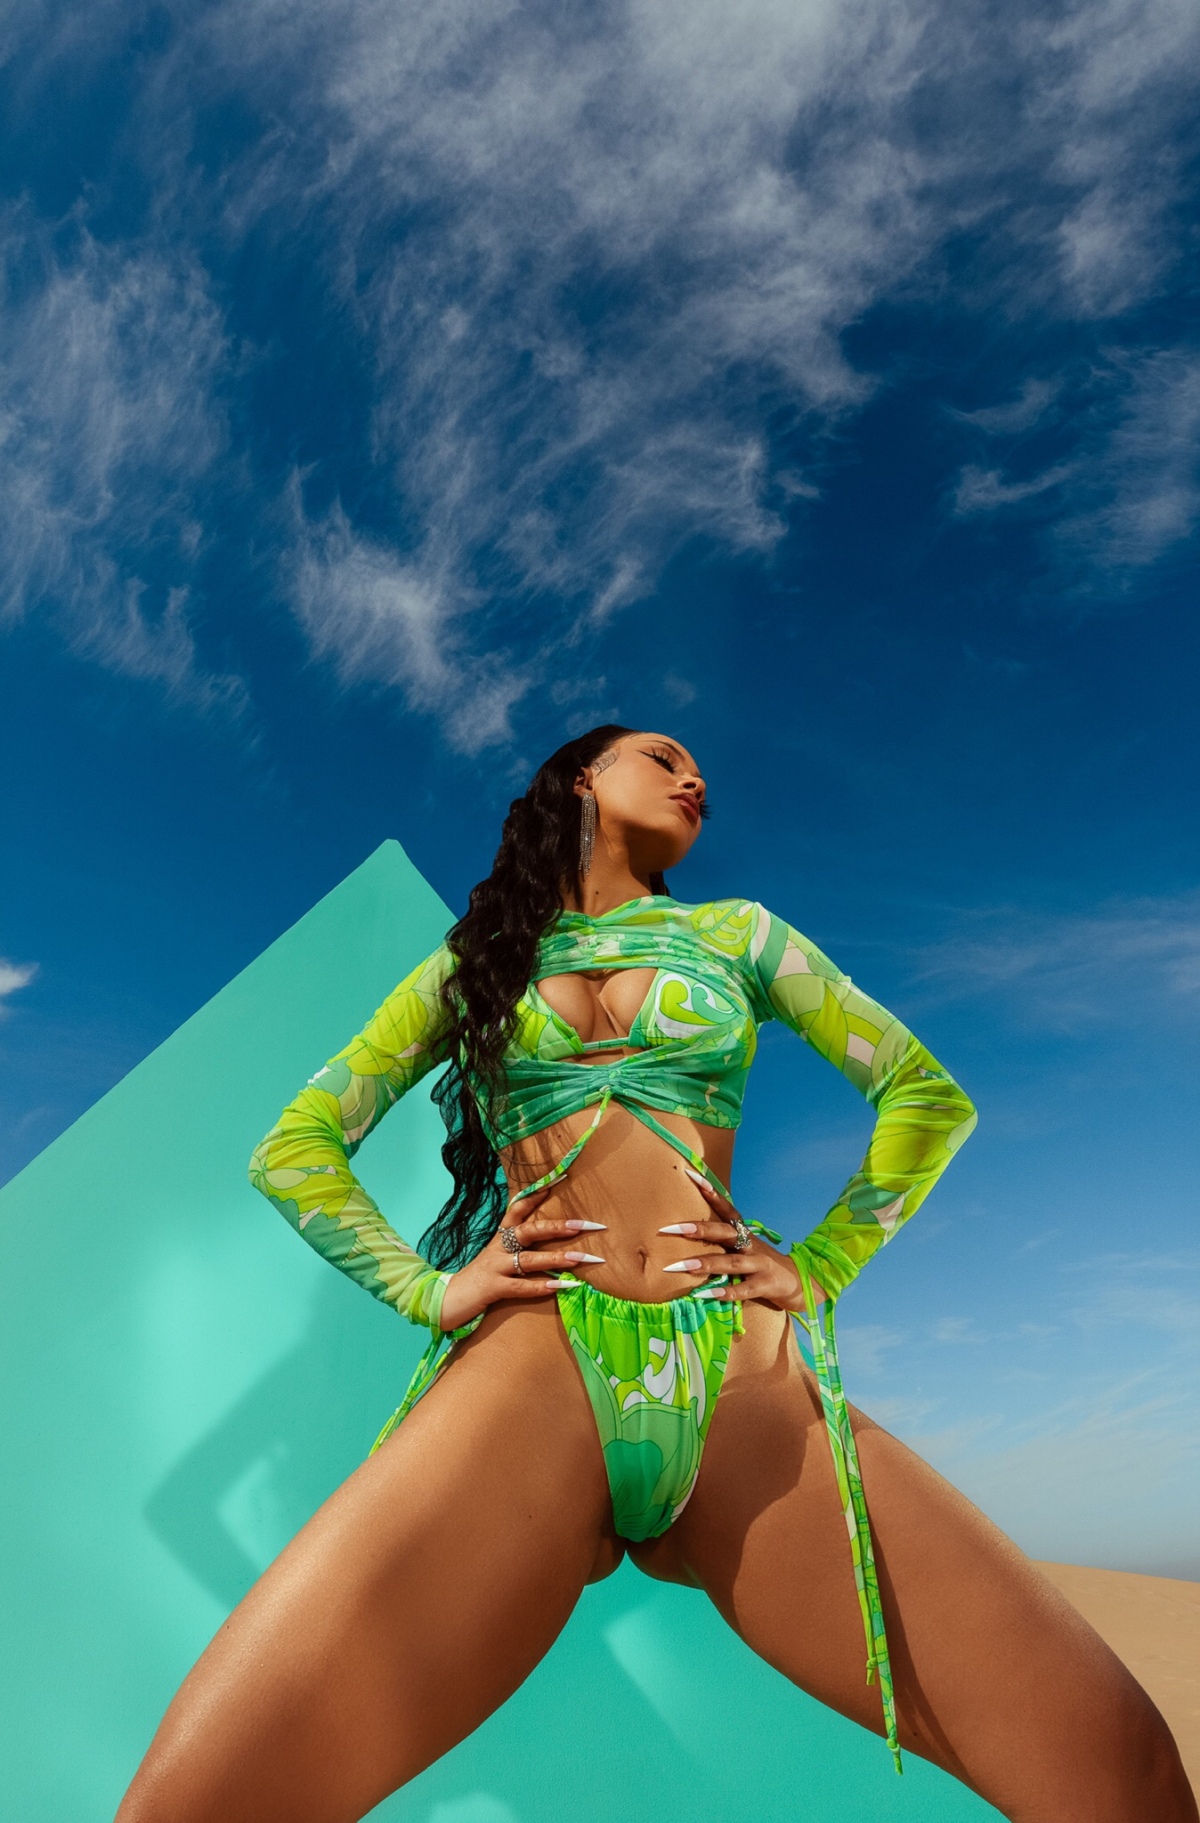 PrettyLittleThing launch second collaboration with singer and rapper Doja Cat